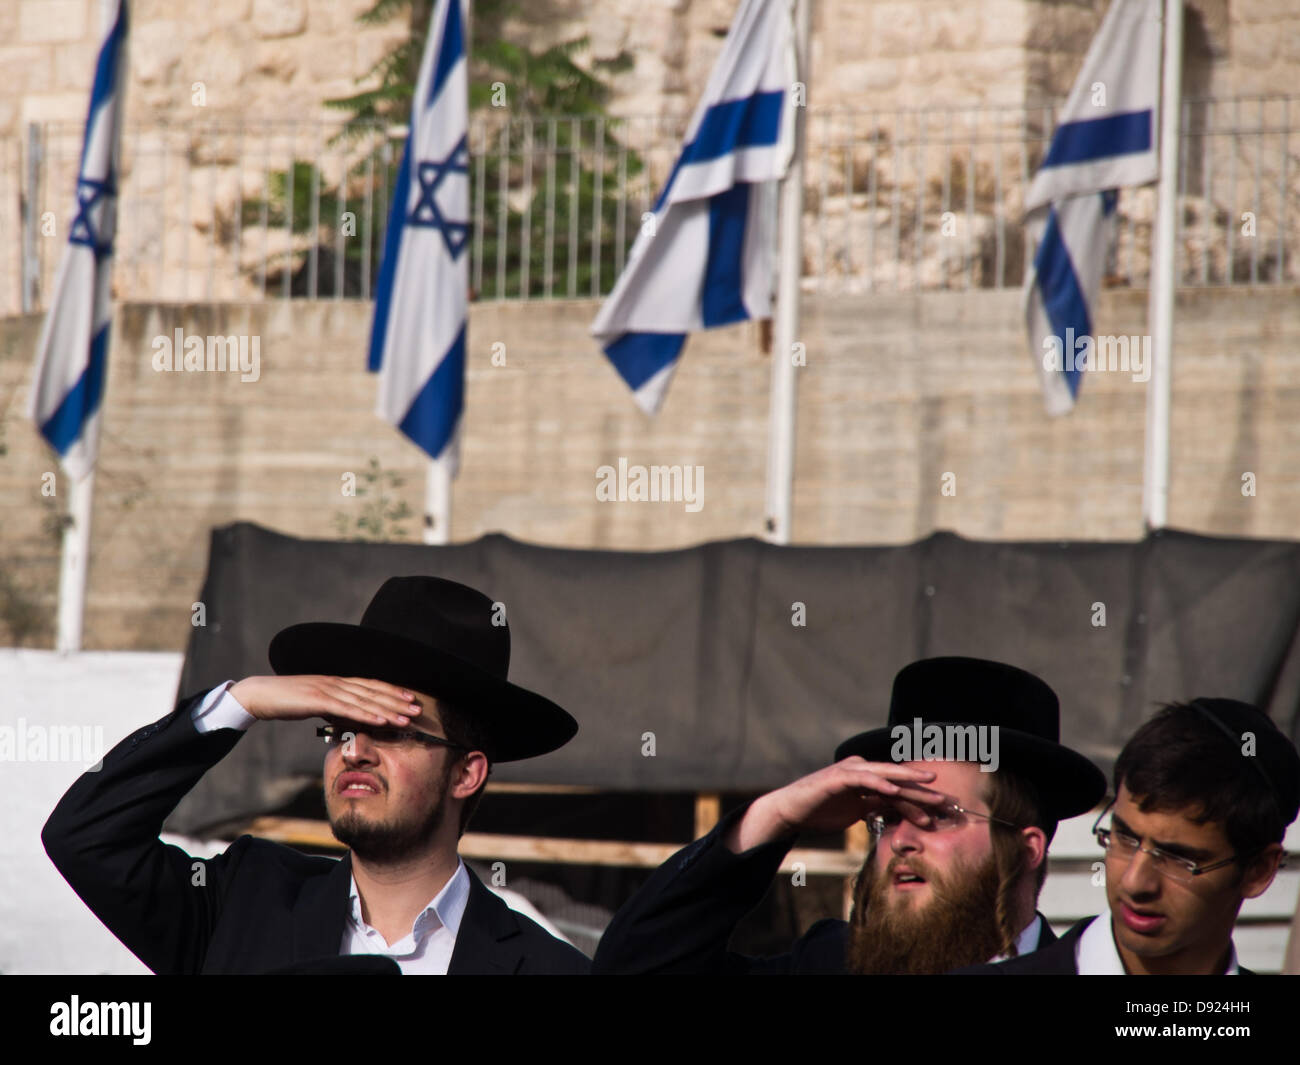 Jerusalem, Israel. 8th June, 2013. Ultra-Orthodox Haredim stretch to view 'Women of the Wall' praying in the women's section of the Western Wall on the 1st of the Hebrew month of Tammuz. Jerusalem, Israel. 9-June-2013.  Violence prevented due to extreme police deployment at the Western Wall for the monthly prayer of 'Women of The Wall'. Ultra-Orthodox Jews object to 'Women of the Wall' donning prayer shawls and phylacteries in a manner reserved only for men. Credit:  Nir Alon/Alamy Live News Stock Photo